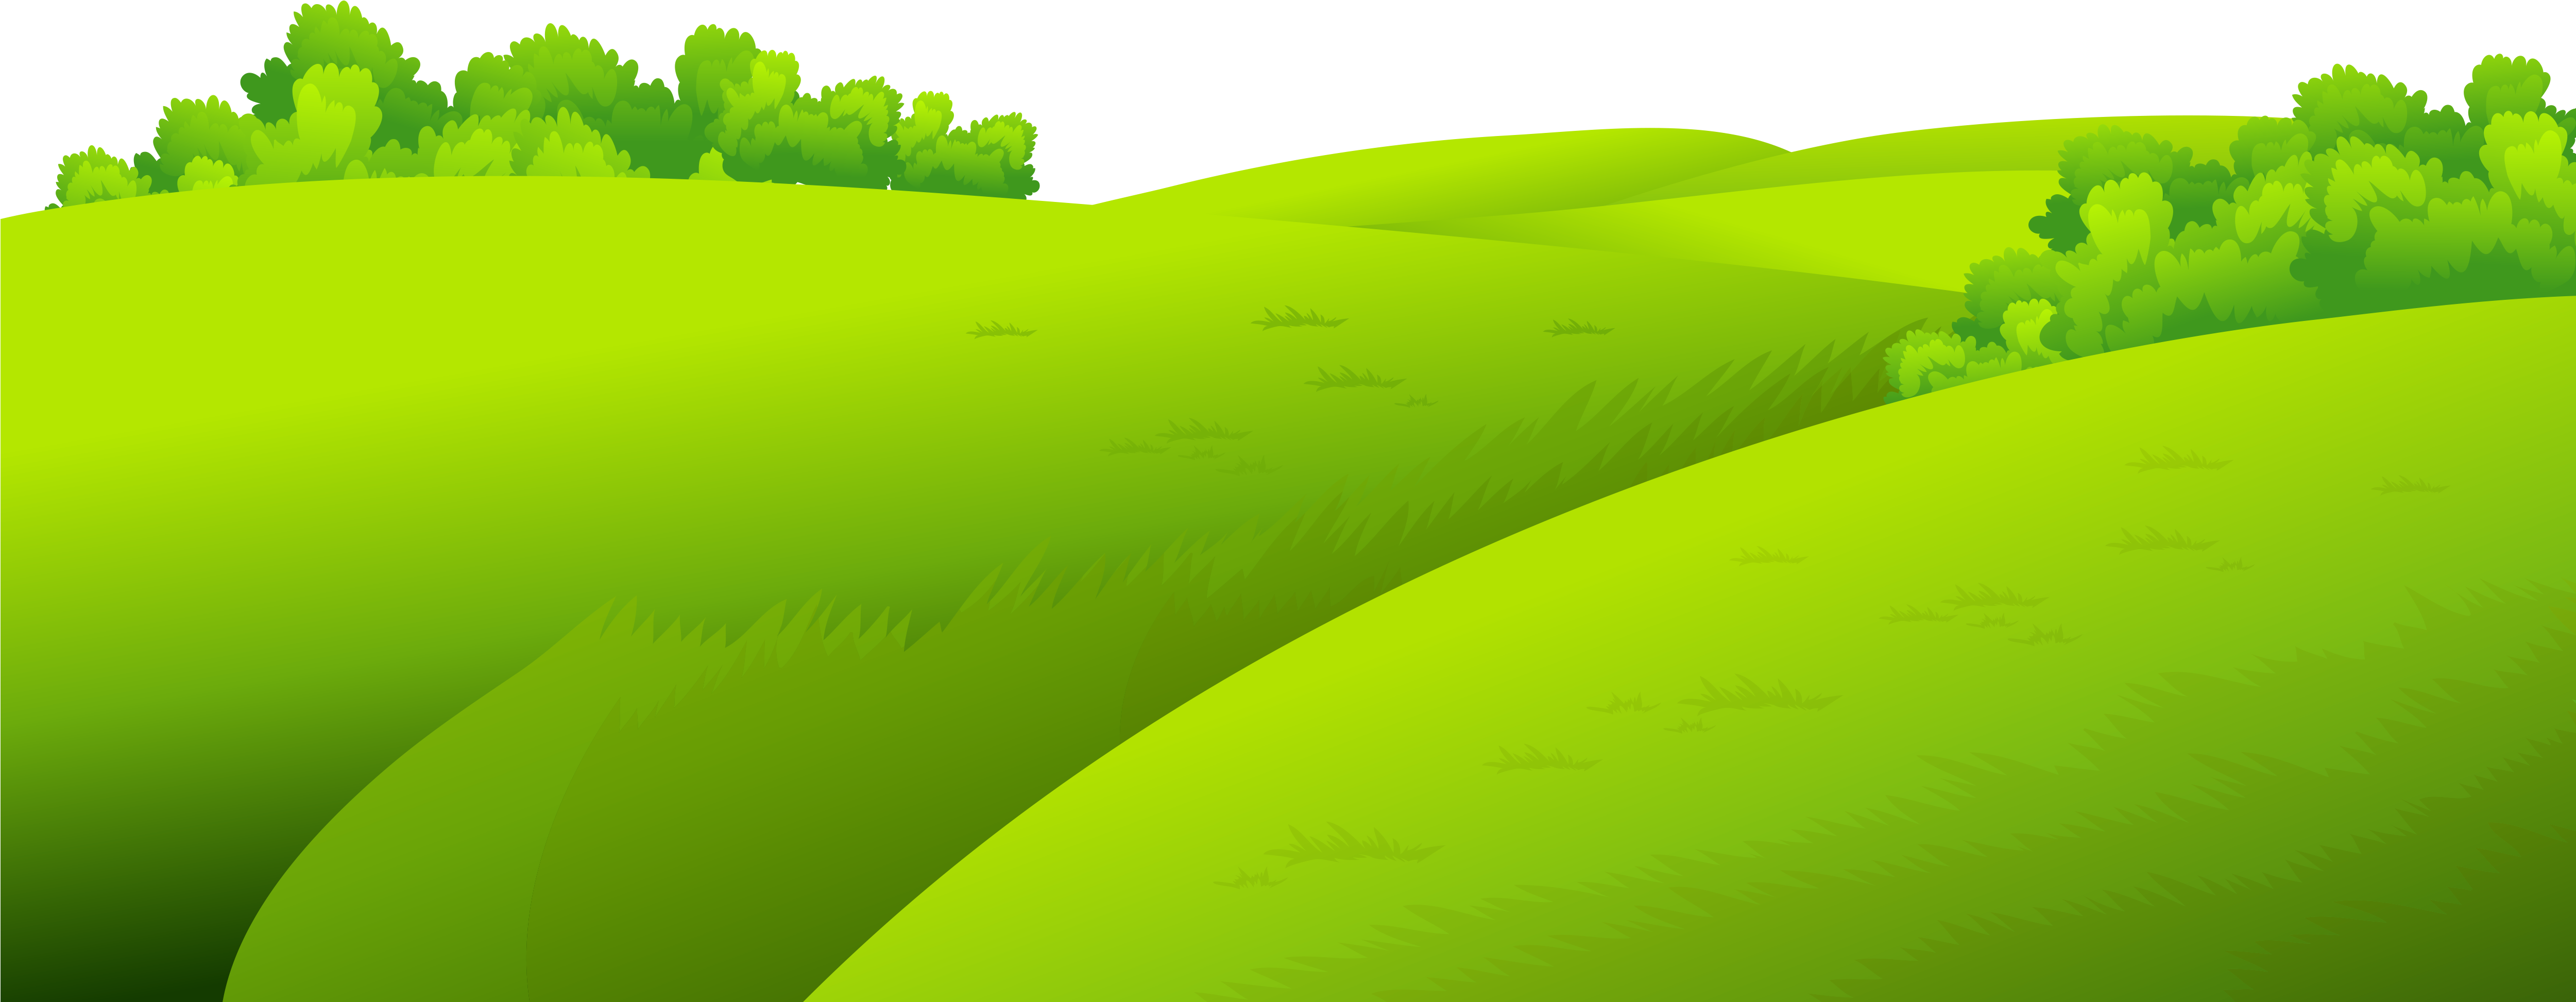 Download Green Grass Ground Png Clip - Cartoon Grass Field Png PNG Image  with No Background 